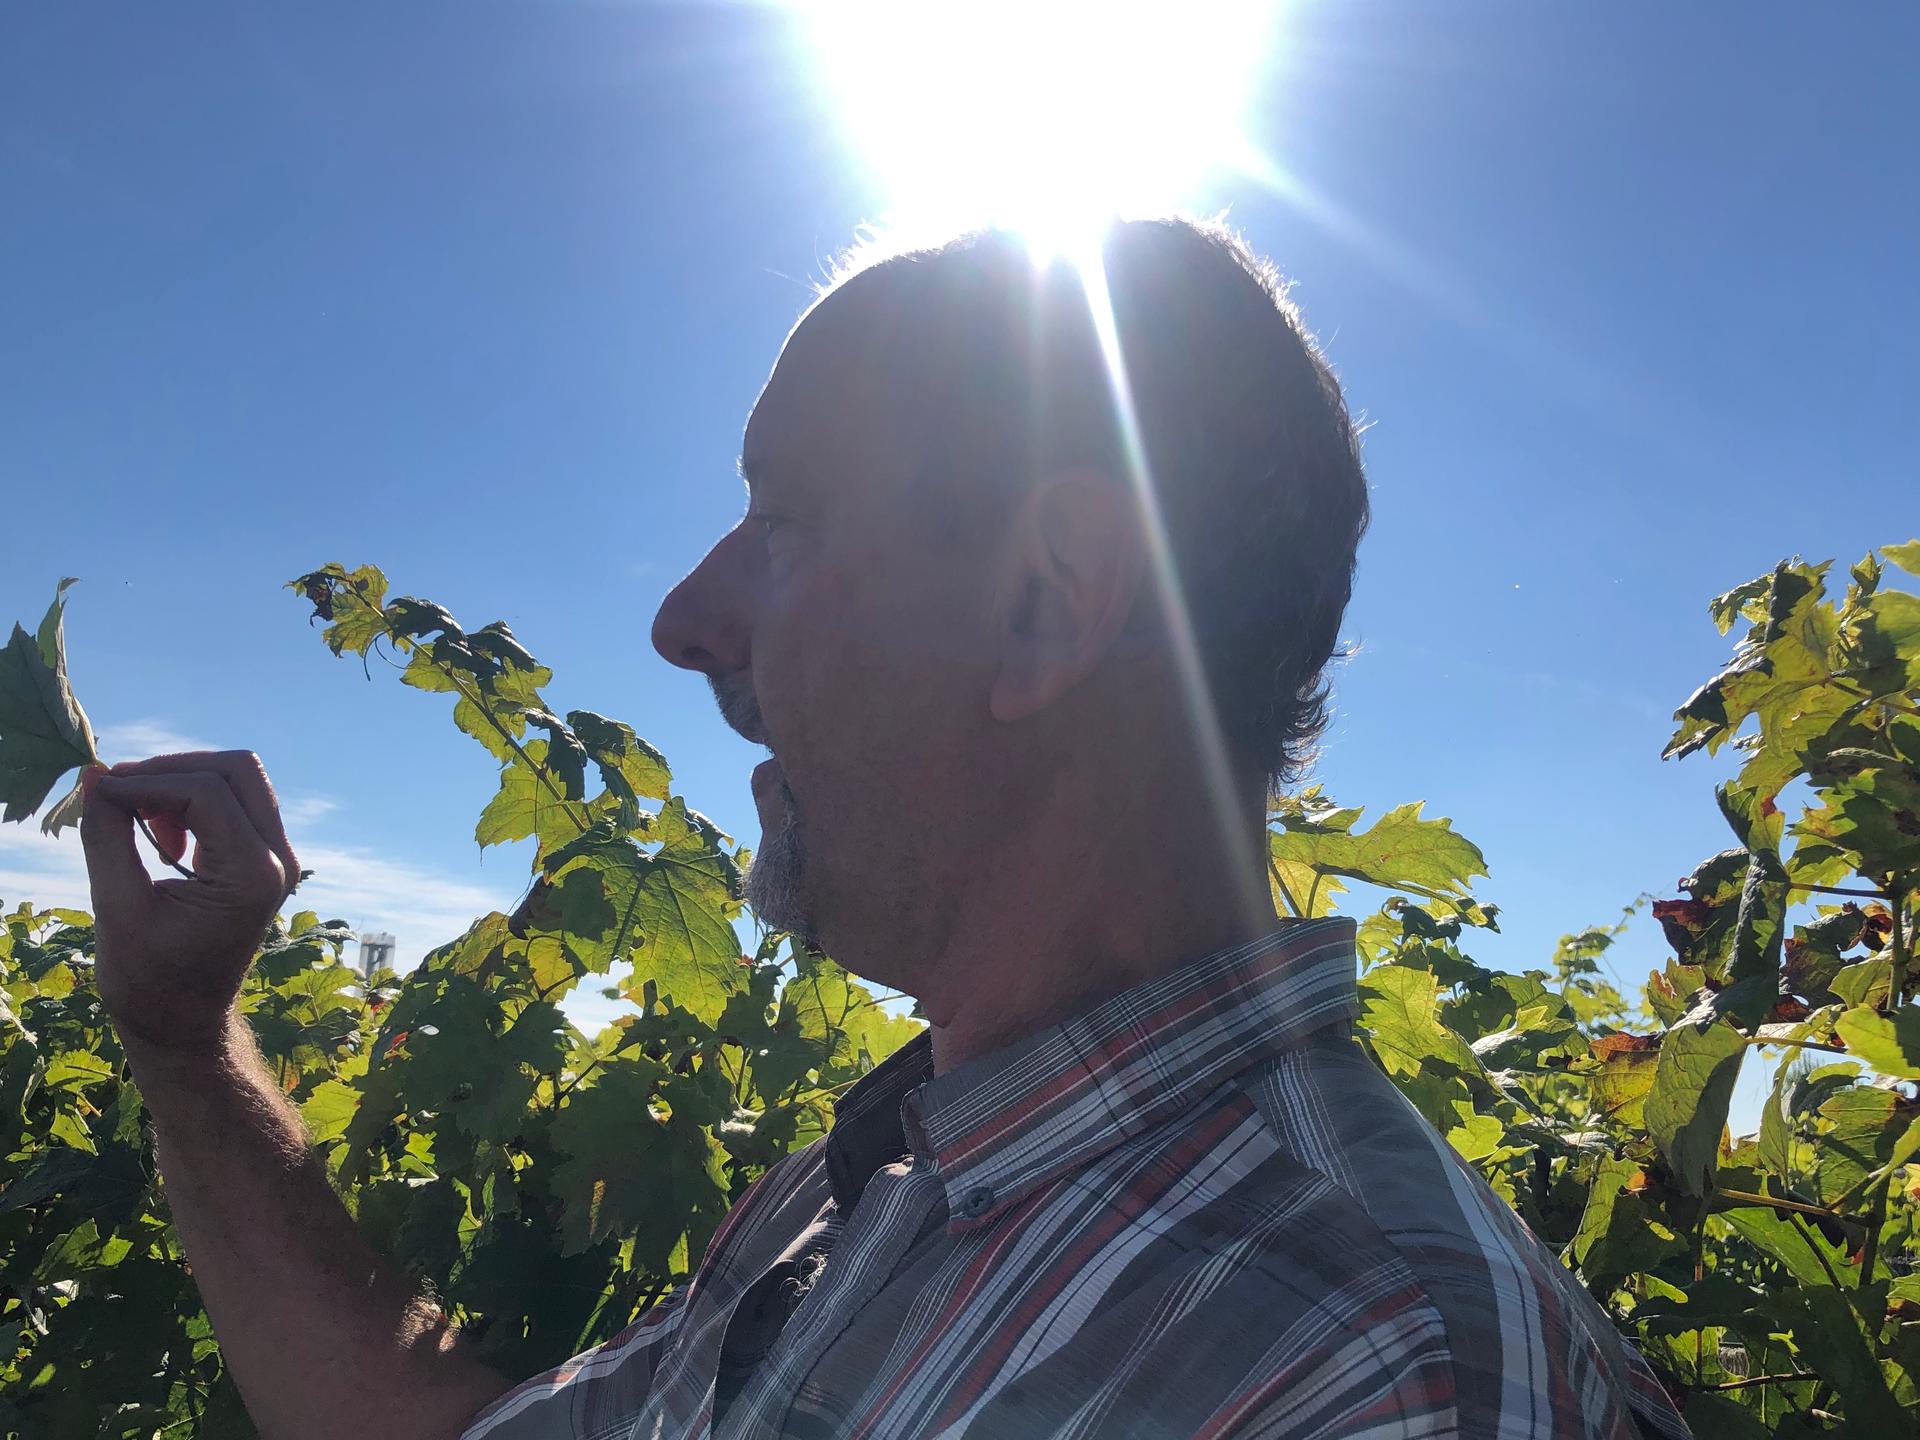 Mark Gowdy showed students some of the more than 50 grape varieties he’s been studying at the Institute of Sciences for Vine and Wines. The winegrower near Bordeaux, France, Gowdy, moved here from California. 